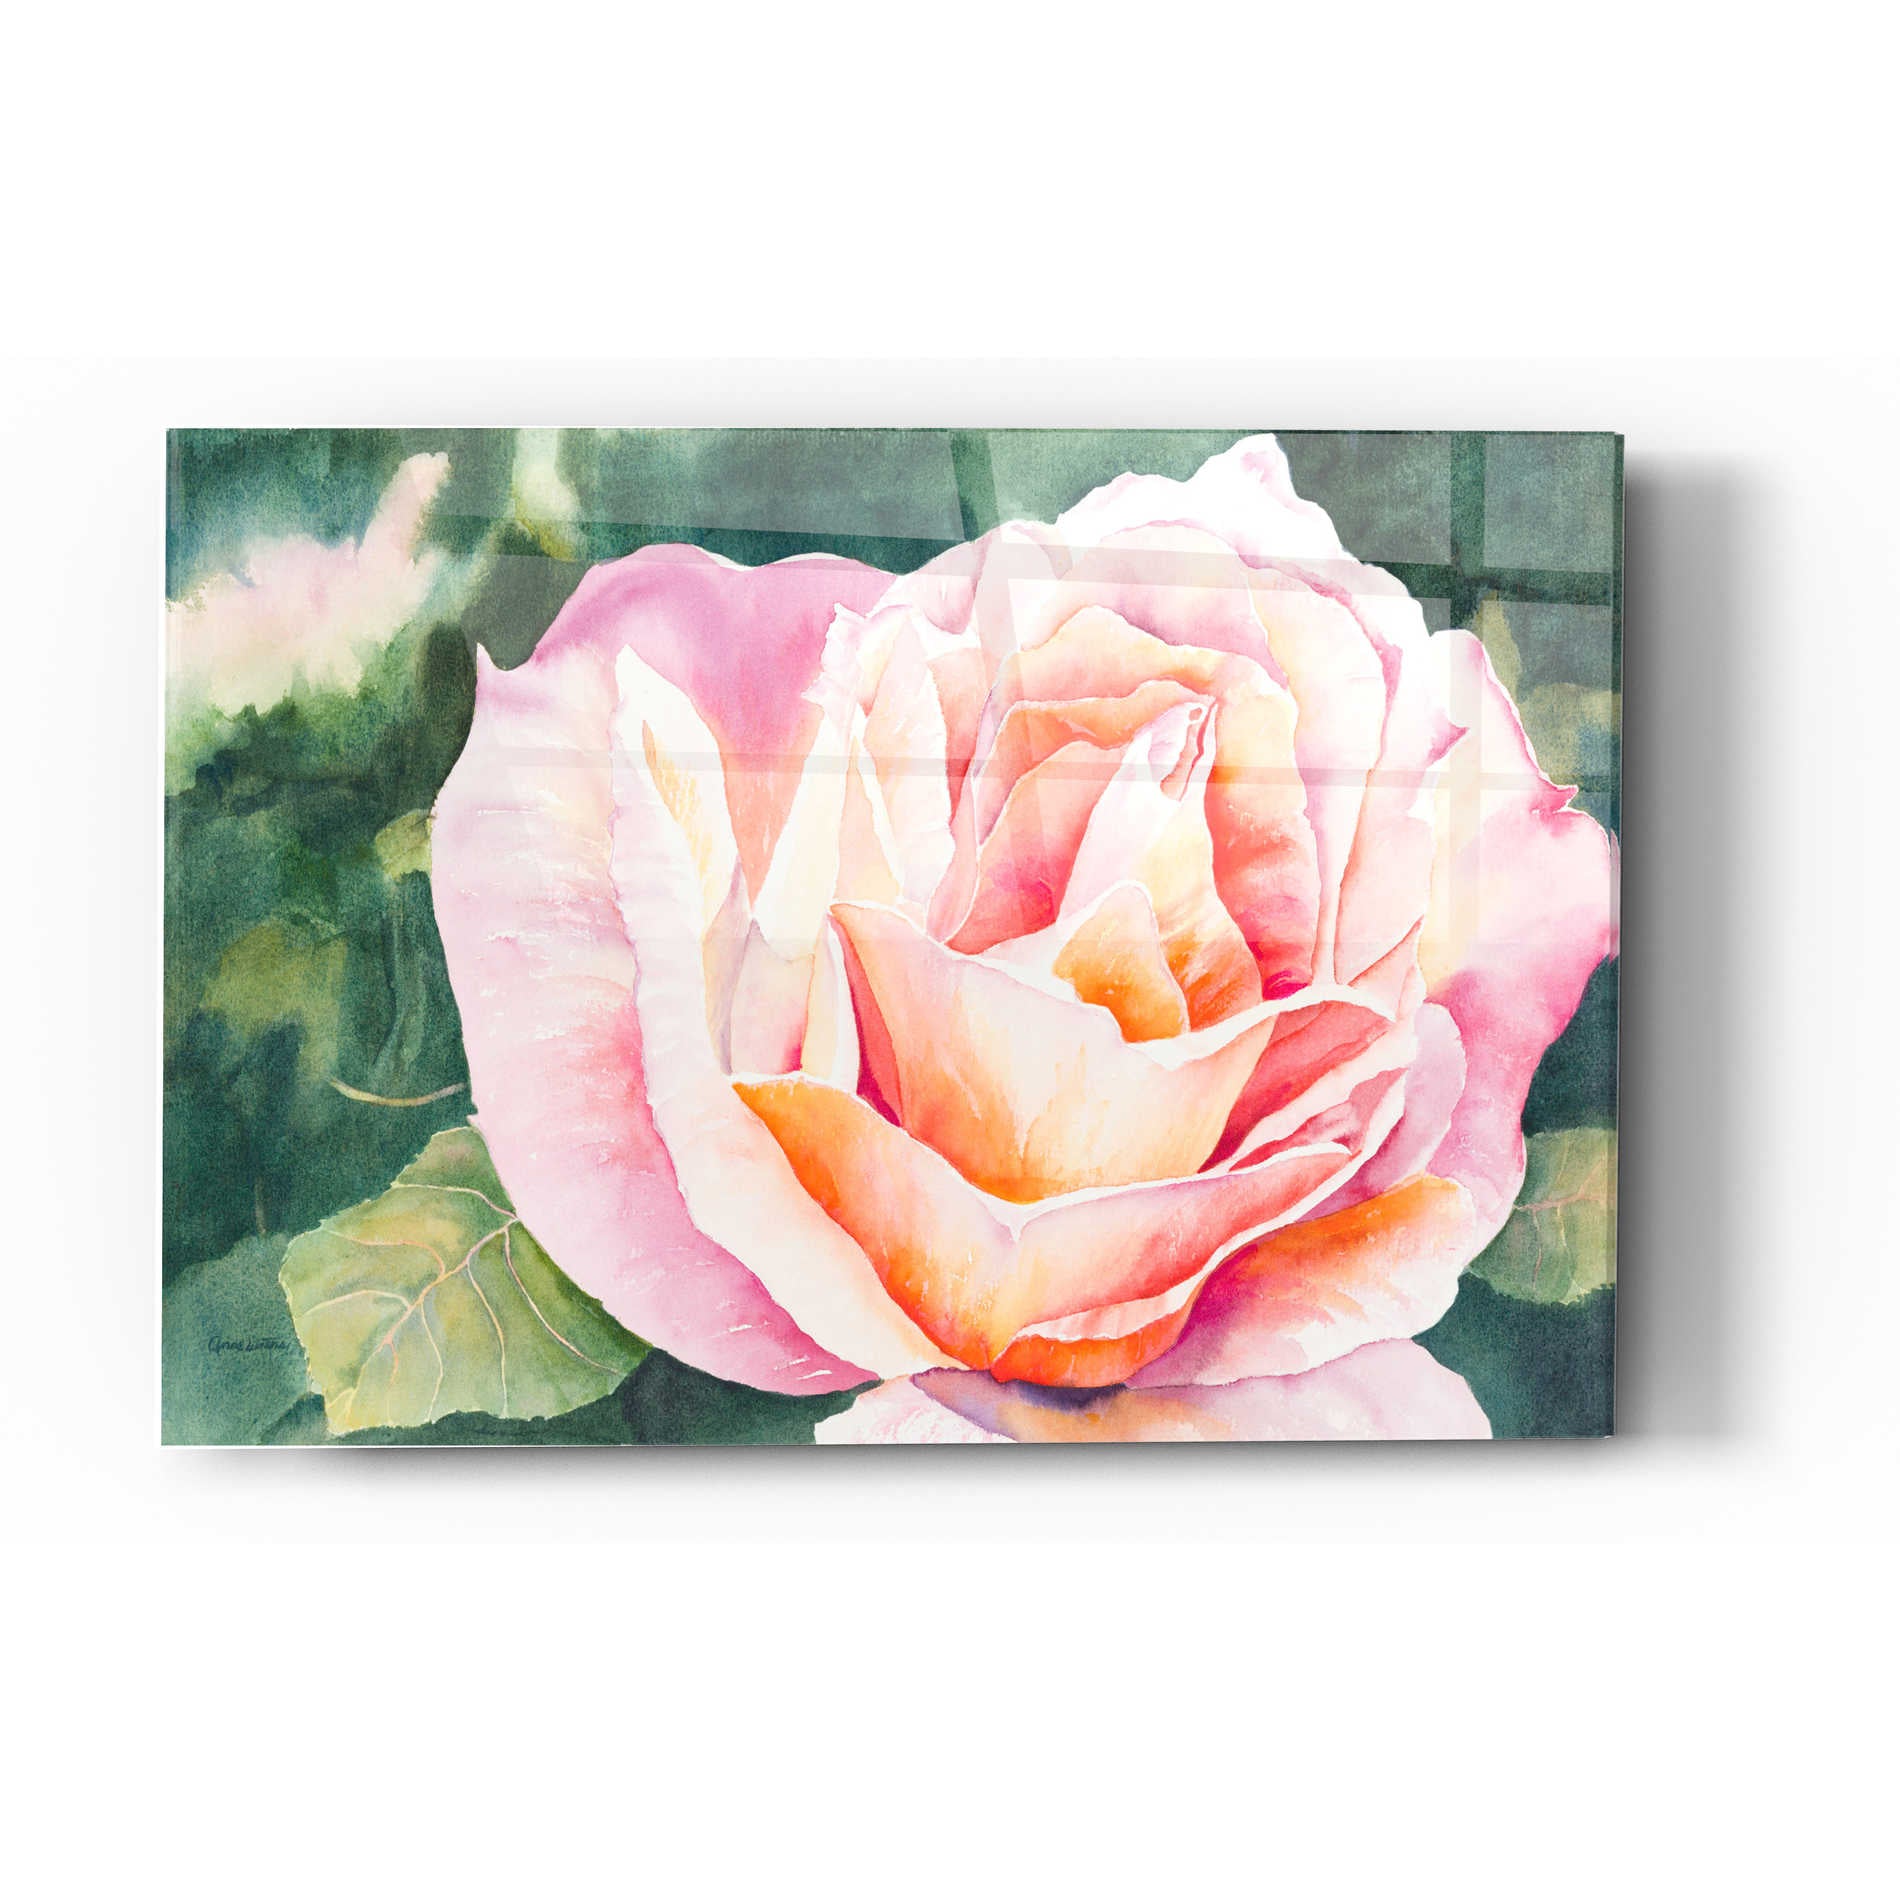 Epic Art 'Sunlit Rose' by Anne Waters, Acrylic Glass Wall Art,12x16